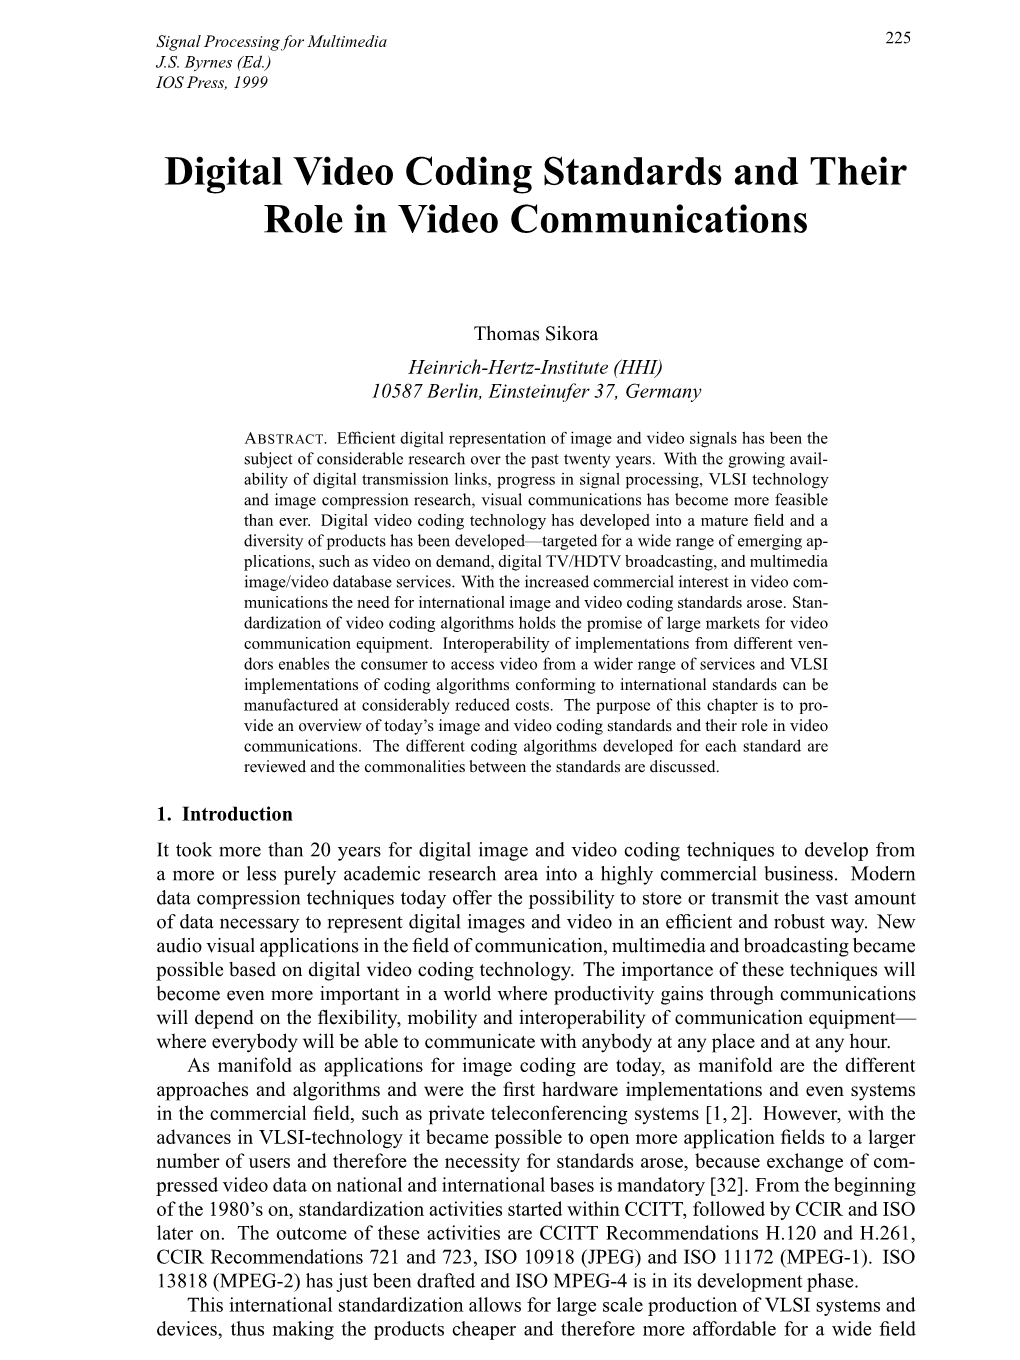 Digital Video Coding Standards and Their Role in Video Communications